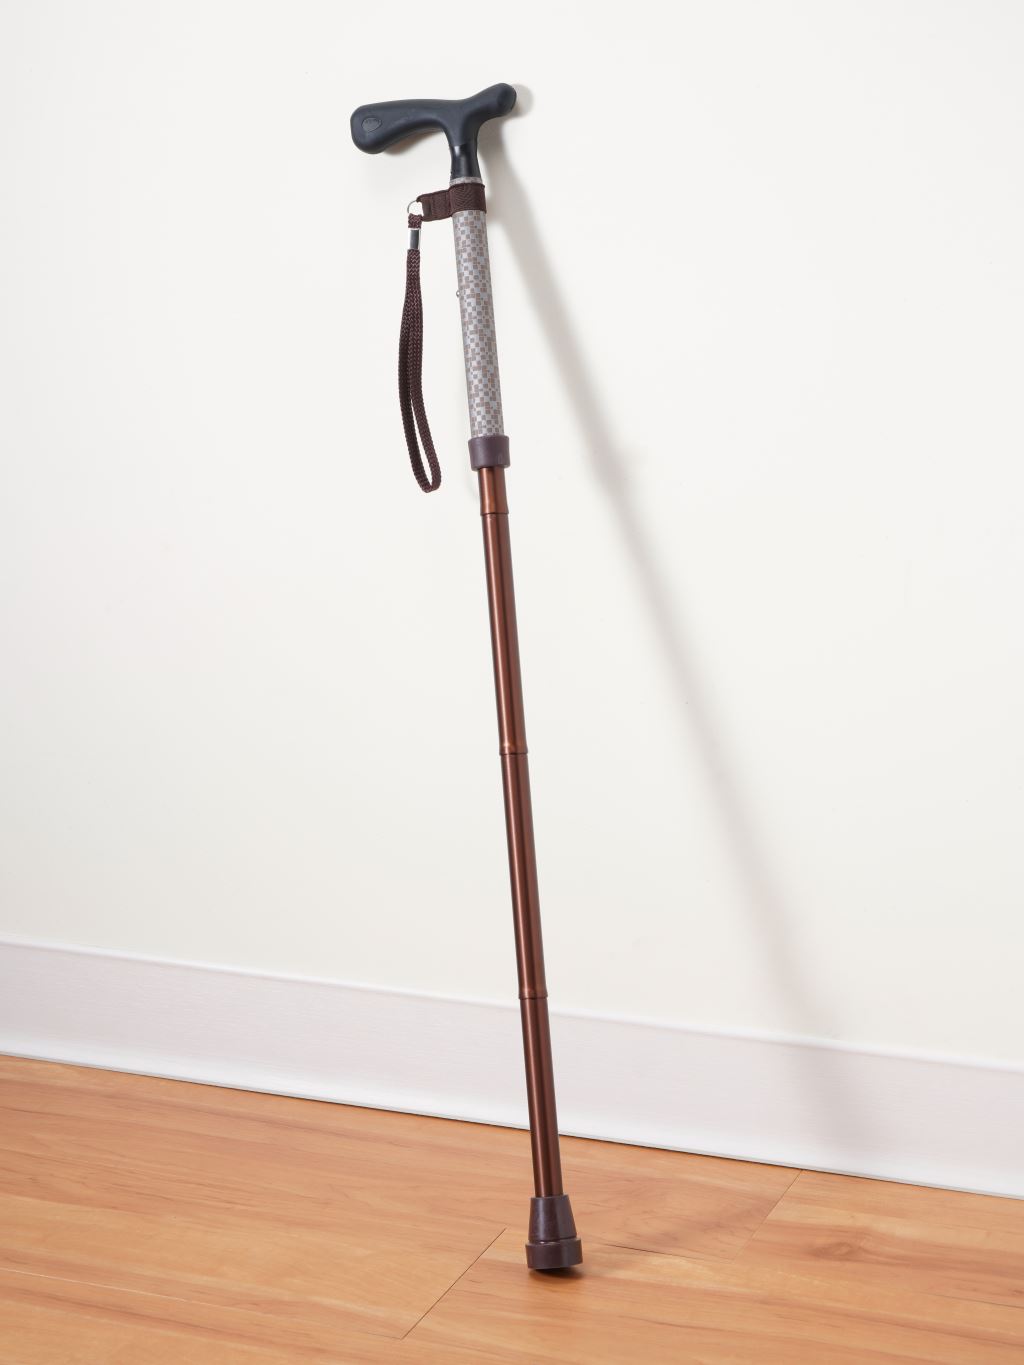 Anti-slip treatment on the handle allows you to put the cane against the wall without it falling off